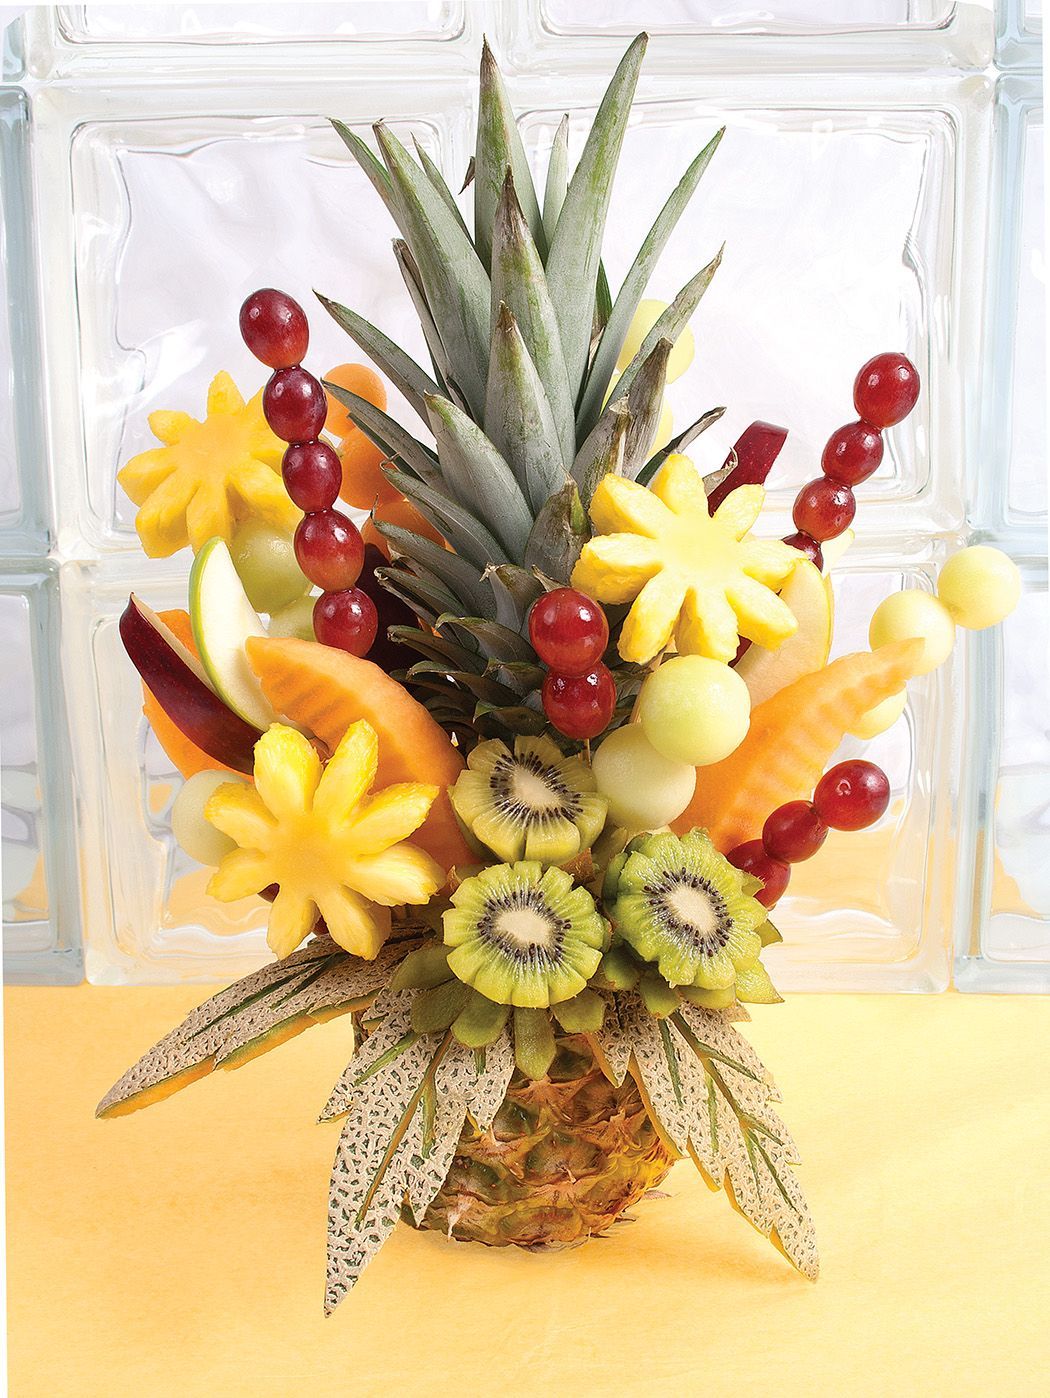 Make a fruit bouquet for your next party.